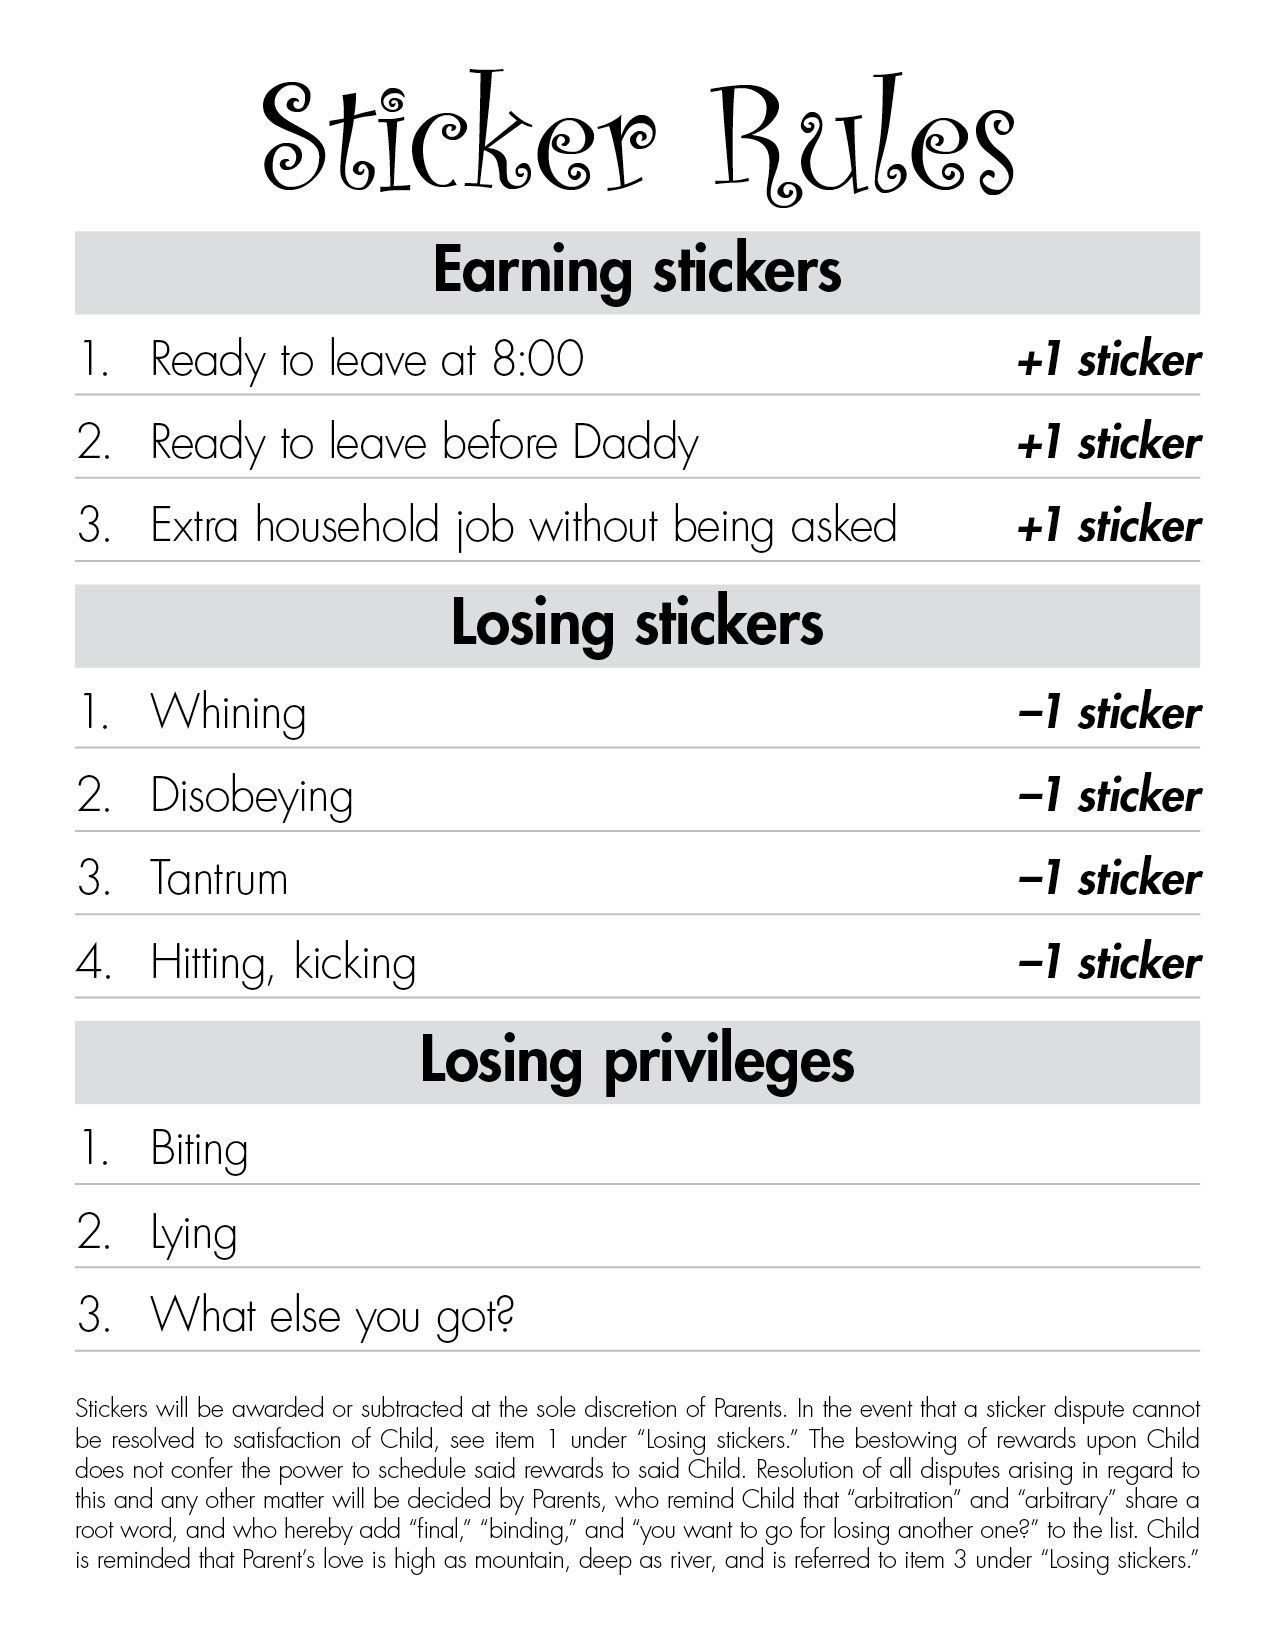 Sticker Reward Chart rules – Plan on revising slightly (I dont plan on taking an